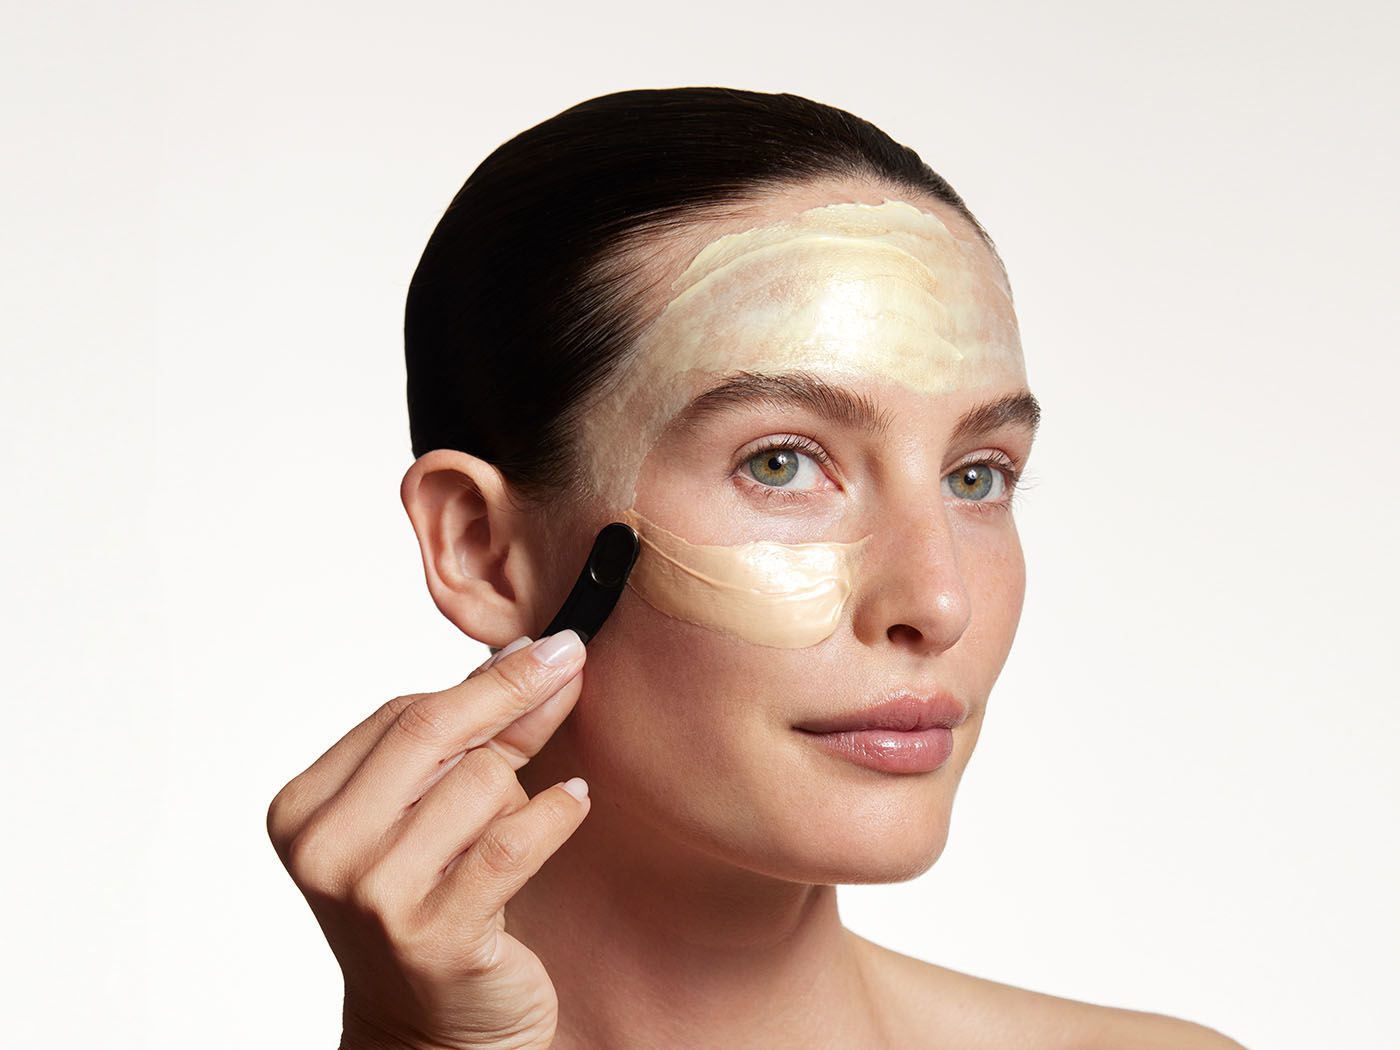 Apply #2 The Mask to the cheeks and orbital zone to restore radiance.